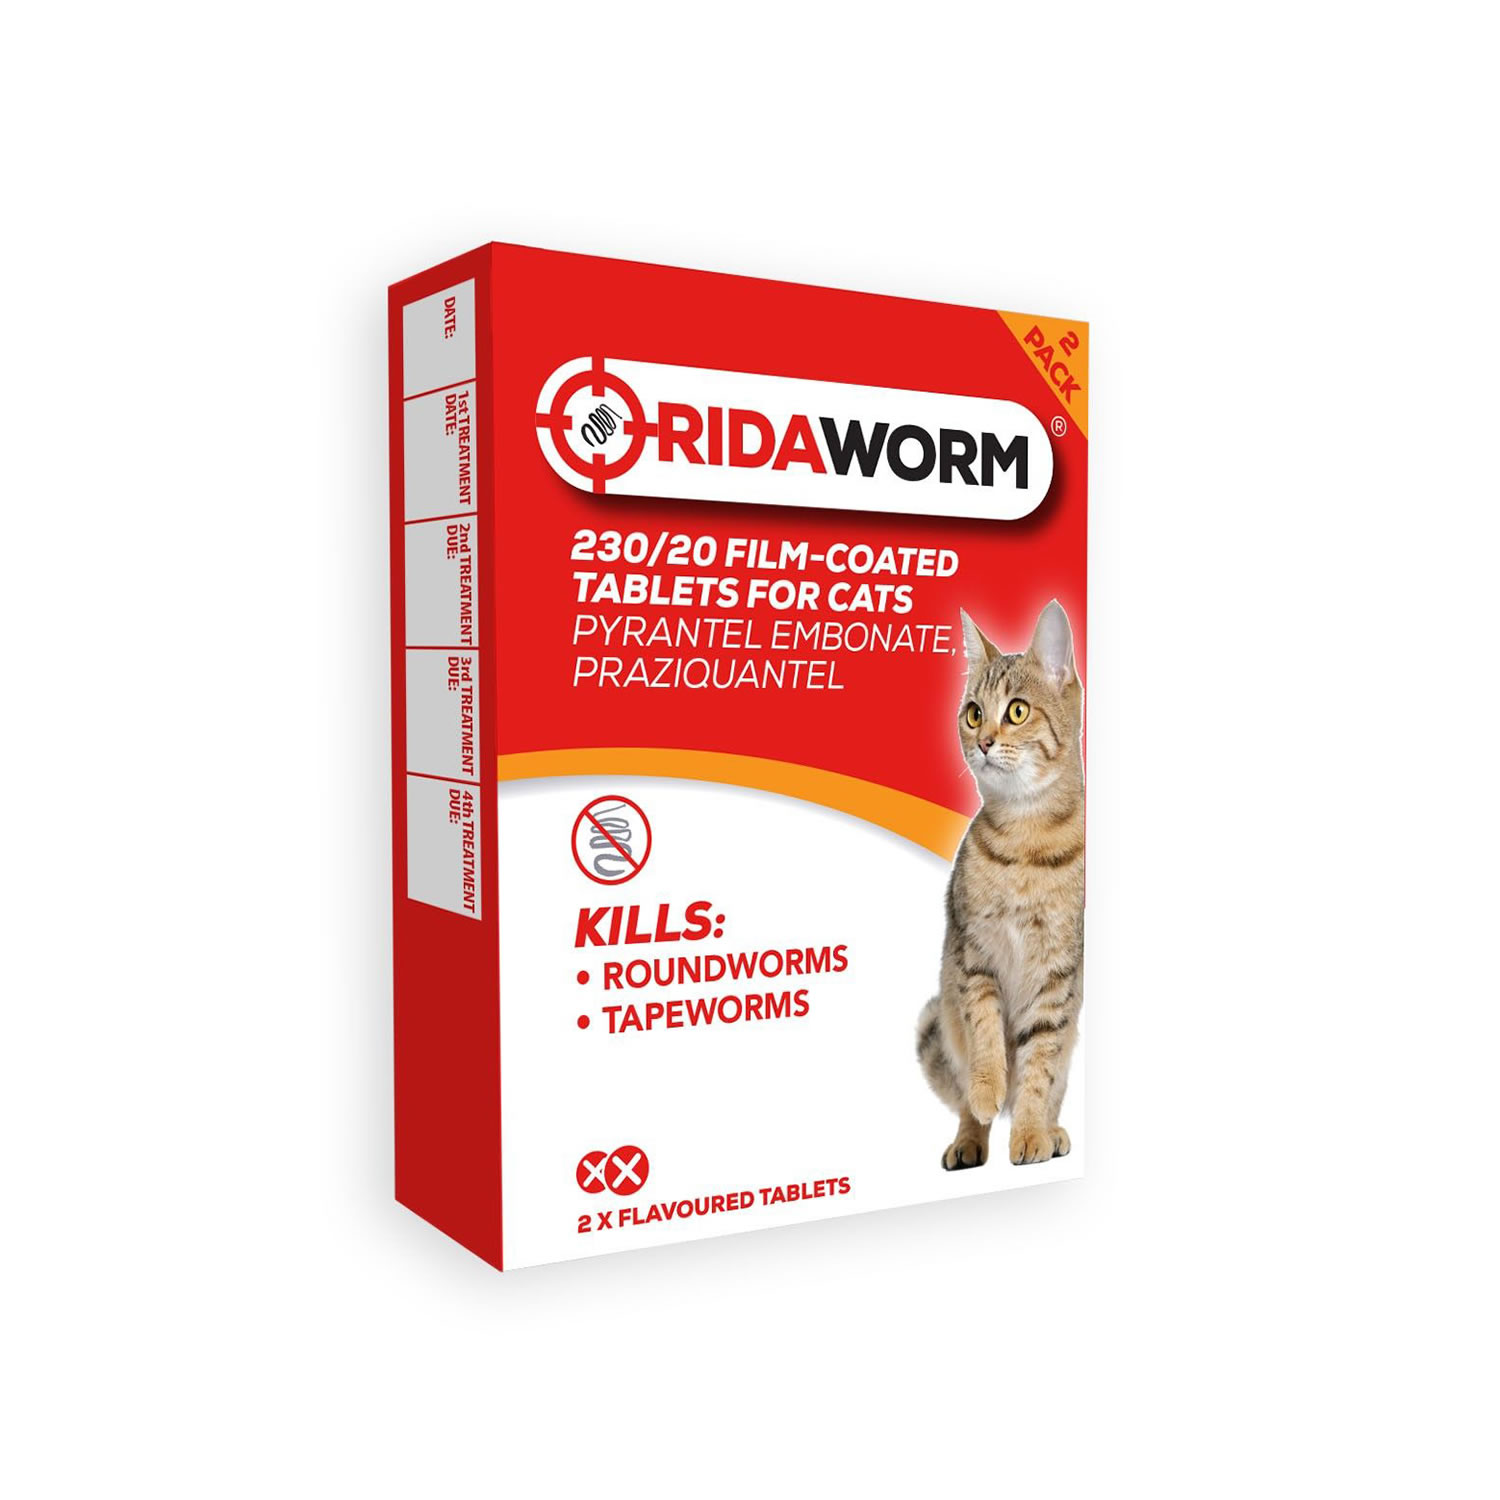 CHANELLE RIDAWORM CAT TABLETS 2 TABLETS 2 TABLETS